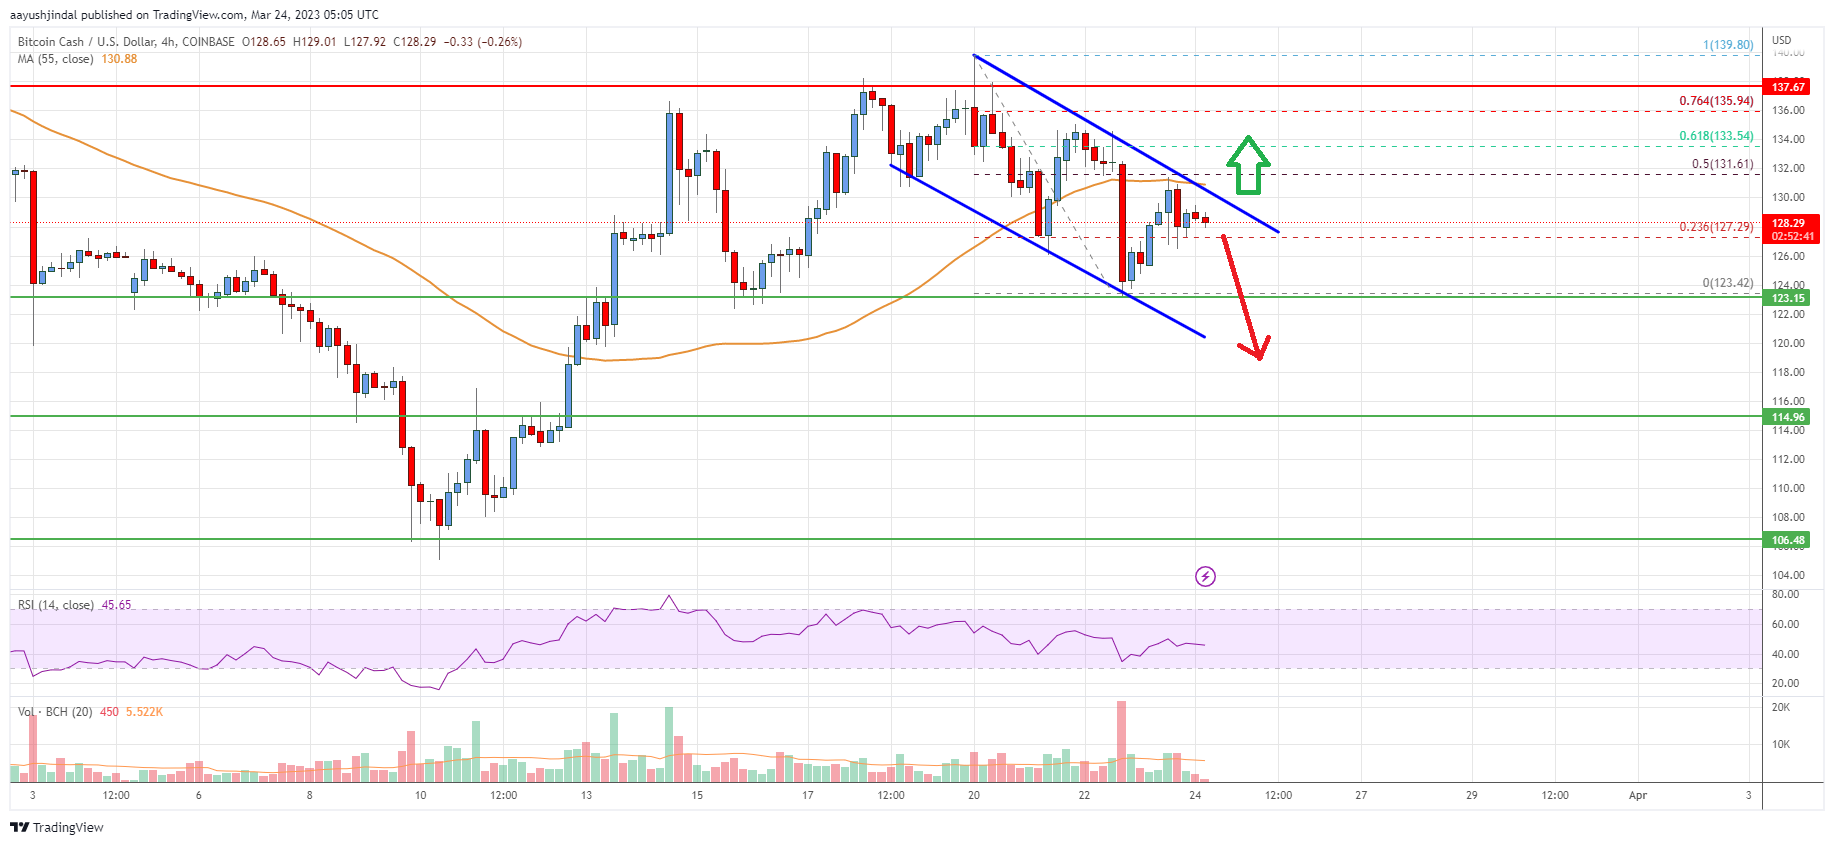 Bitcoin Cash Analysis: Key Uptrend Support Intact At $122